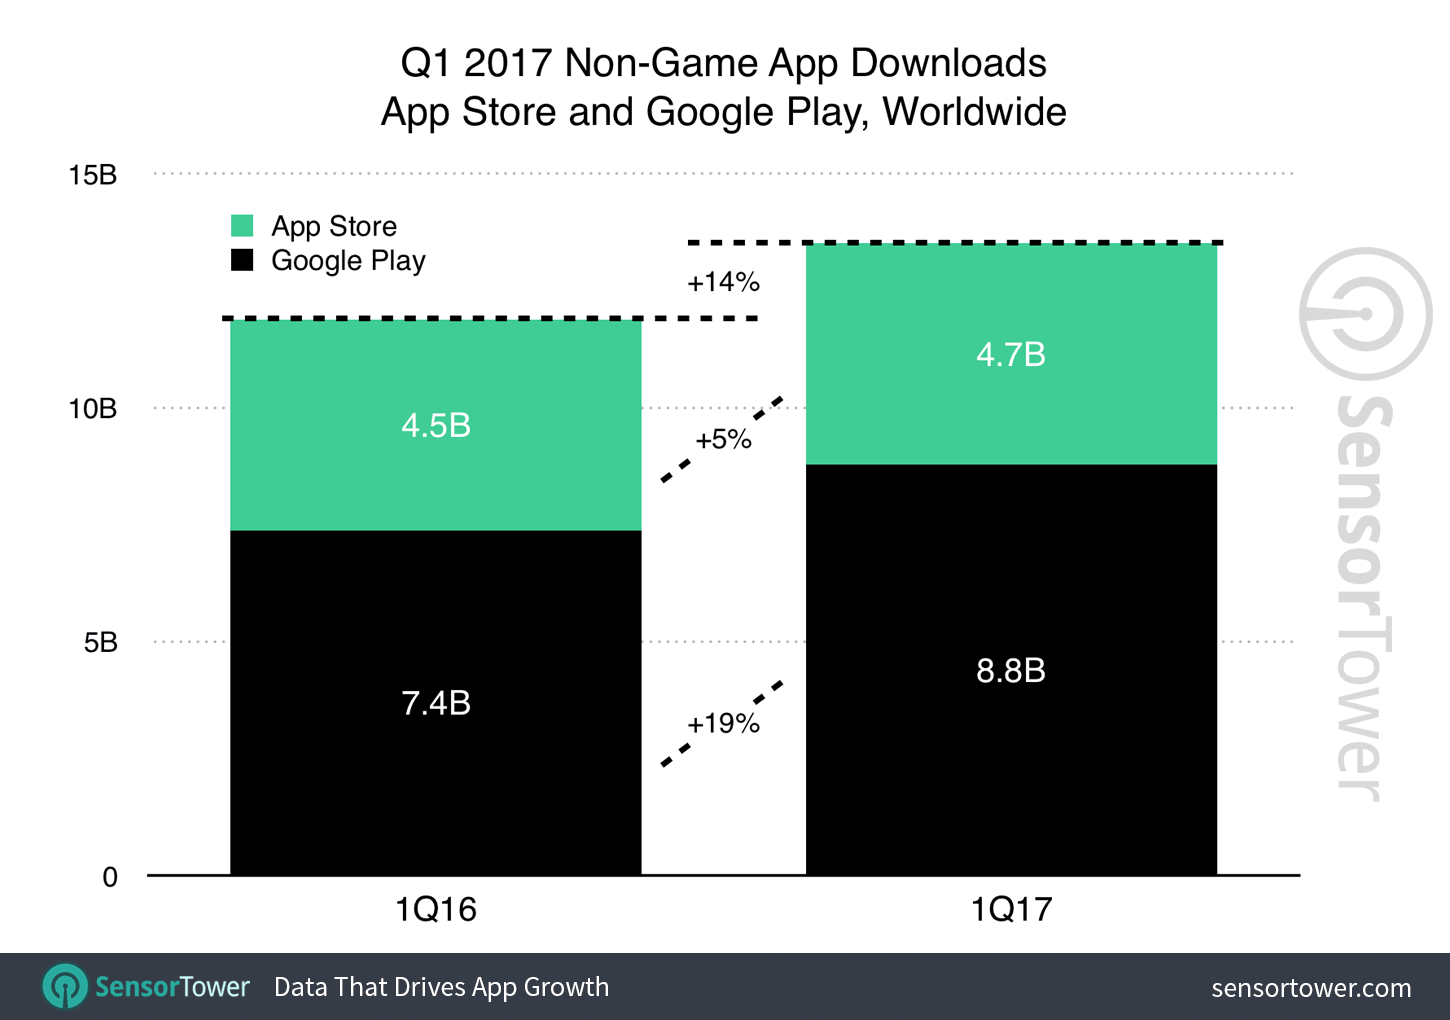 Q1 2017 Apps Worldwide Download Growth